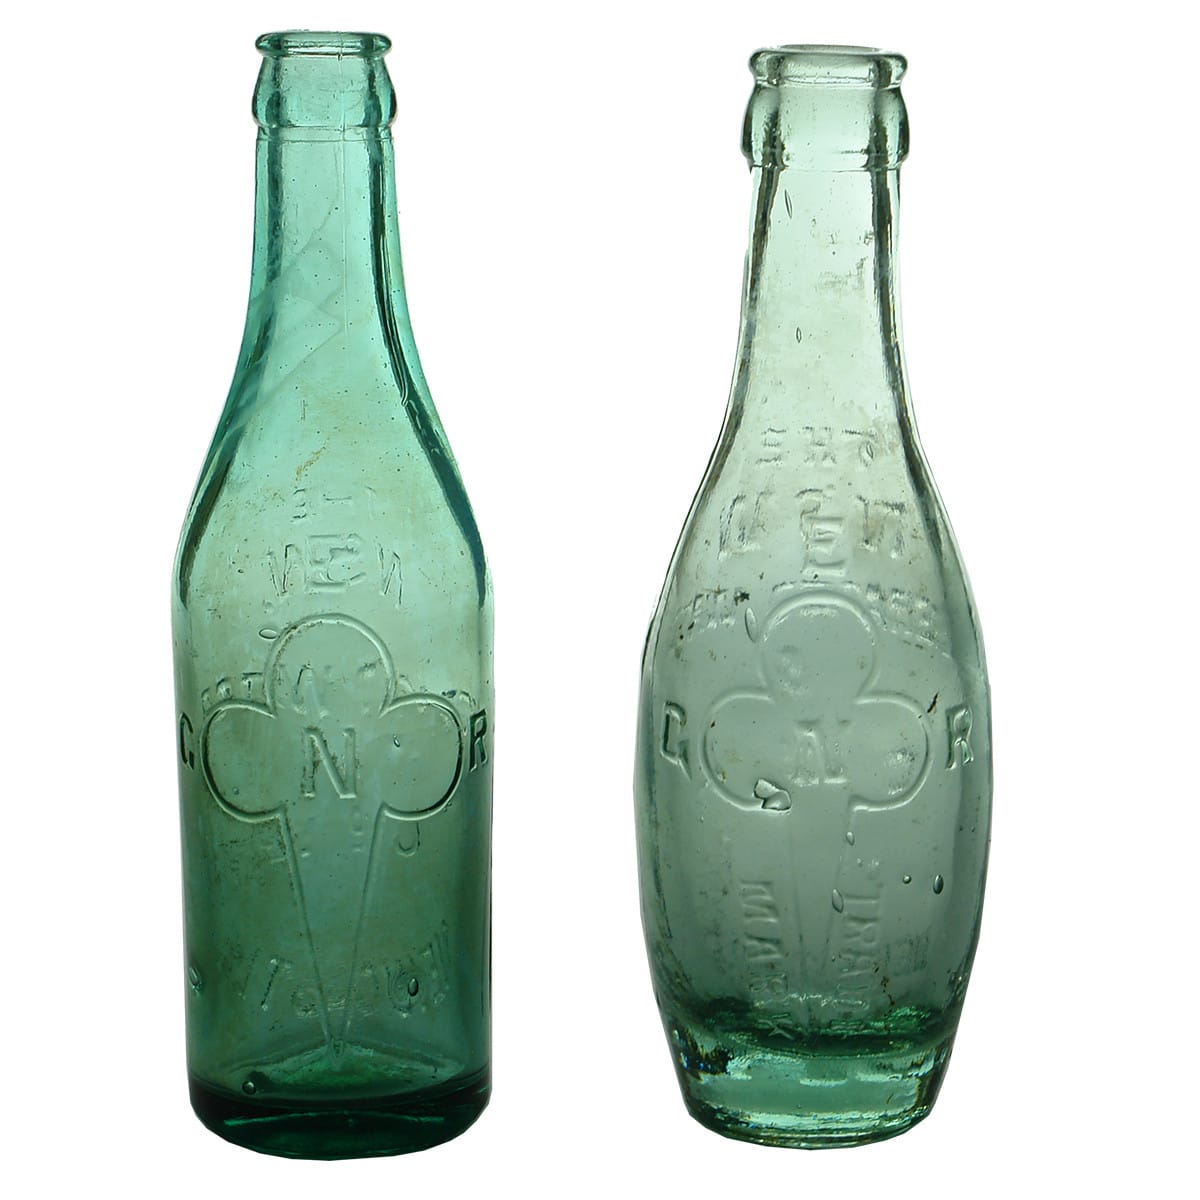 Pair of Crown Seals. N. S. W. Aerated Water & C. Co Ltd., Newcastle. 10 oz Champagne & 6 oz Skittle. (New South Wales)